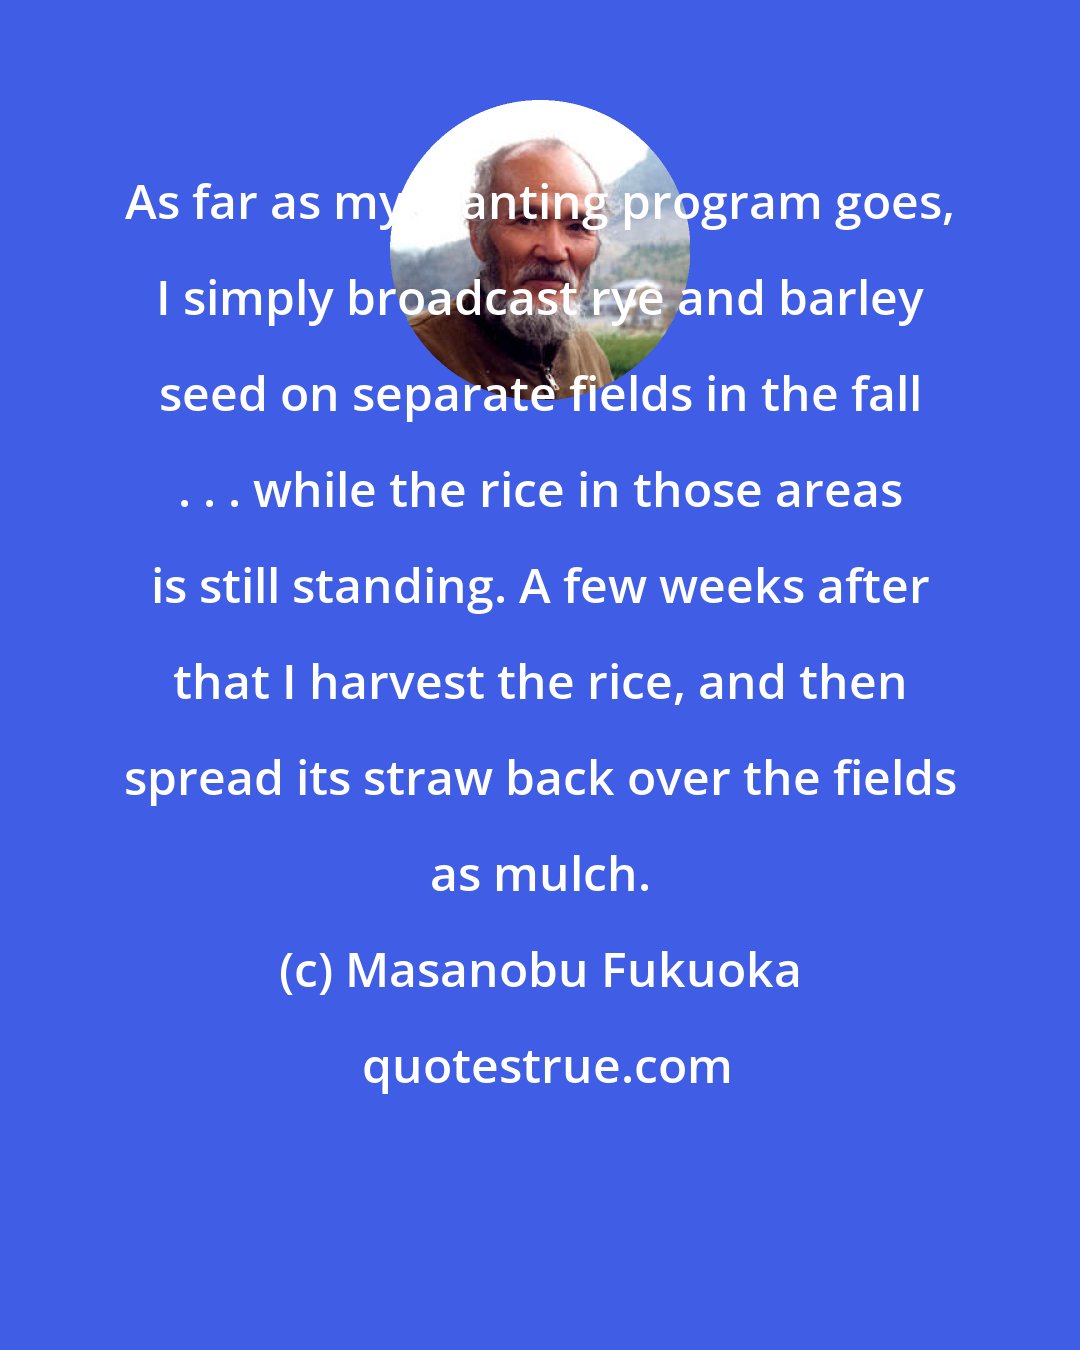 Masanobu Fukuoka: As far as my planting program goes, I simply broadcast rye and barley seed on separate fields in the fall . . . while the rice in those areas is still standing. A few weeks after that I harvest the rice, and then spread its straw back over the fields as mulch.